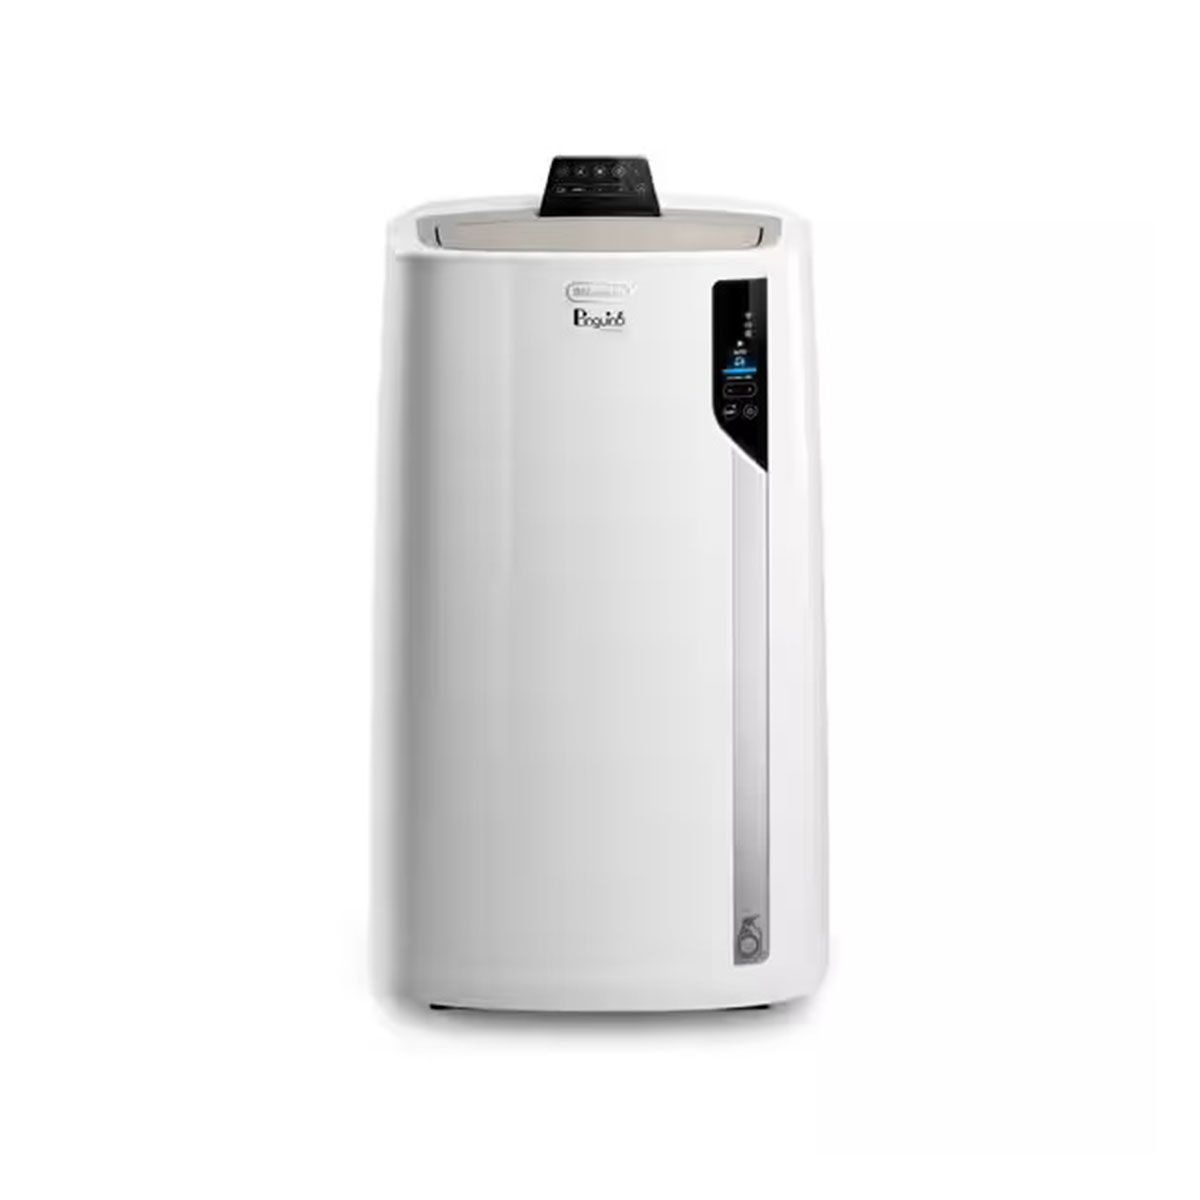 Delonghi pinguino pacelcstwifi portable air nditioner